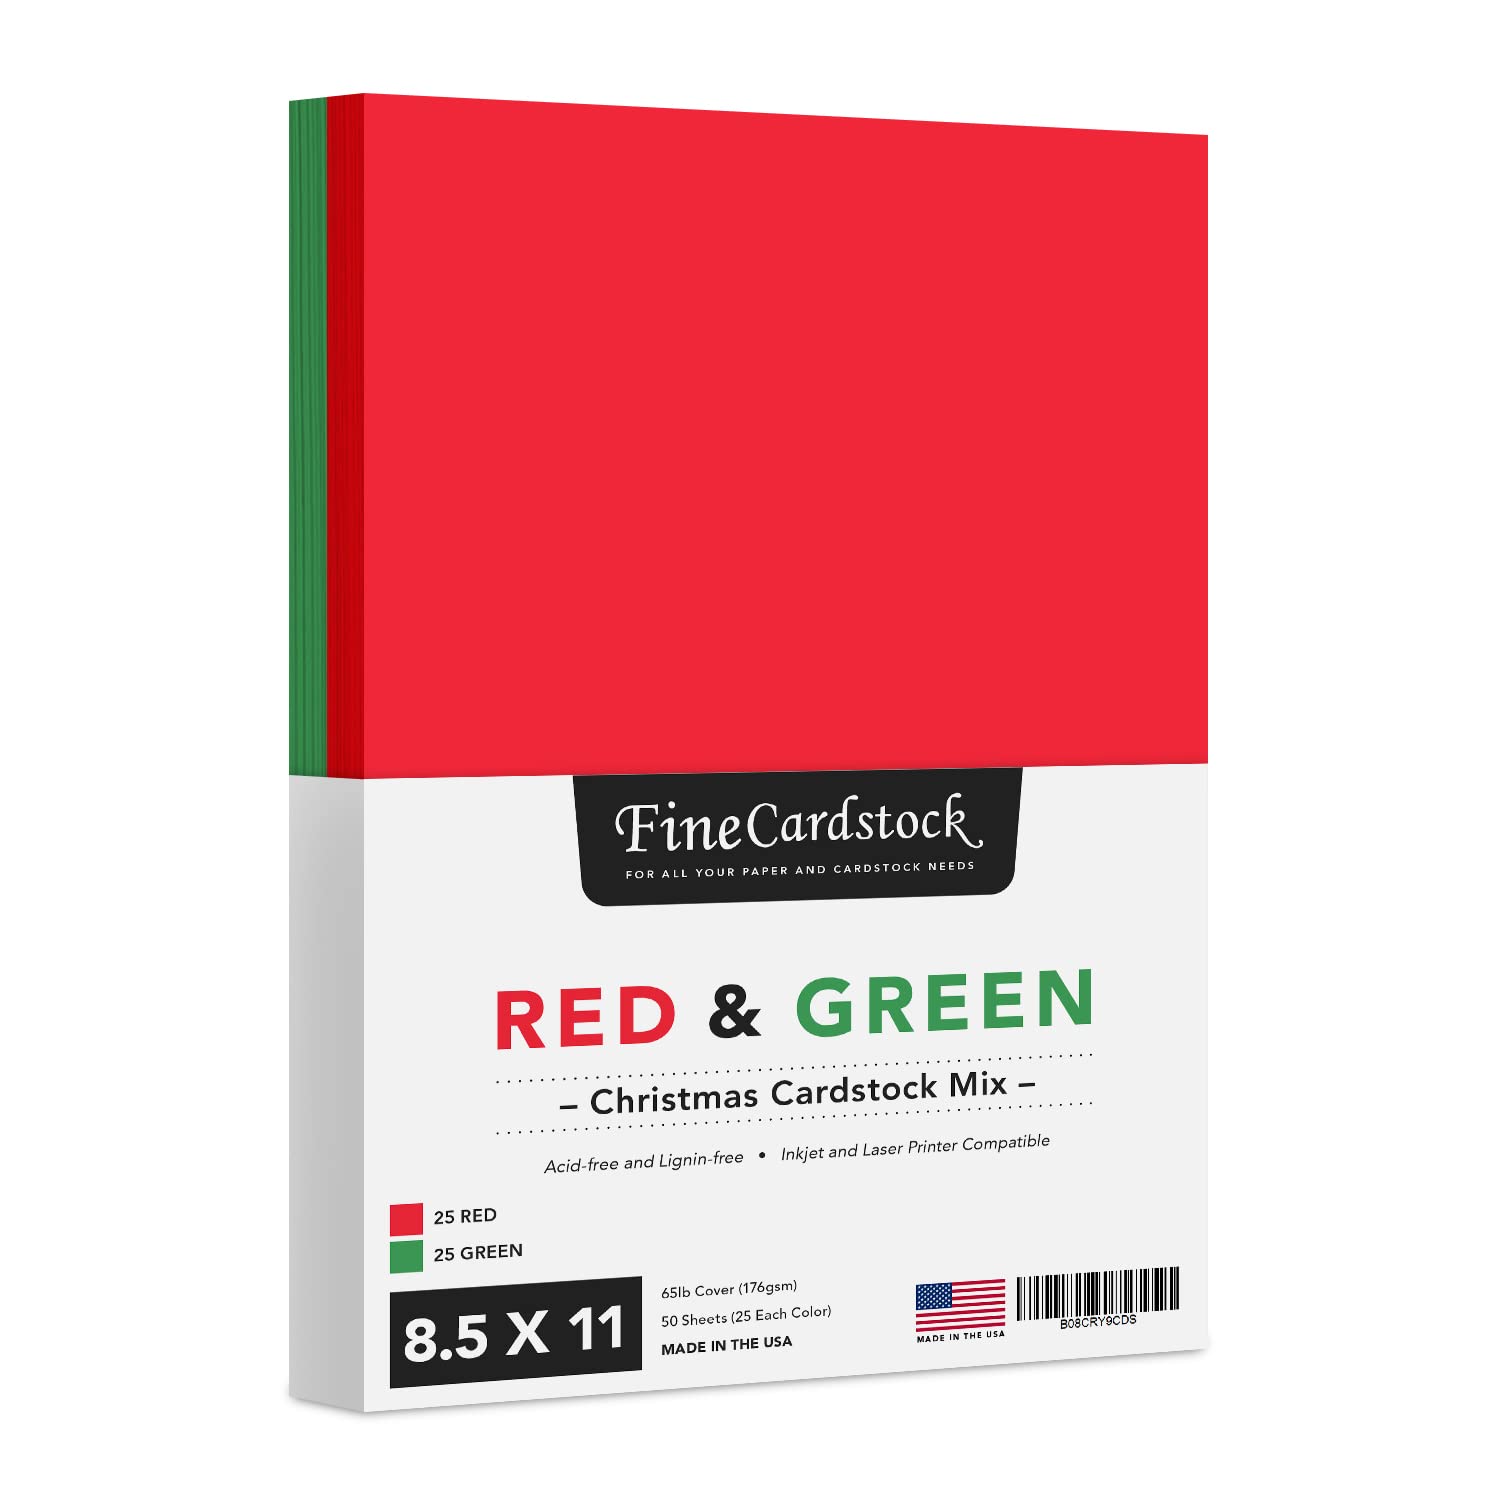  Holiday Christmas Colored Card Stock Paper, Red & Green 8.5 x  11 Cardstock for Greeting Cards, Art & Crafts, Invitations, 65lb Cover,  Printer Compatible